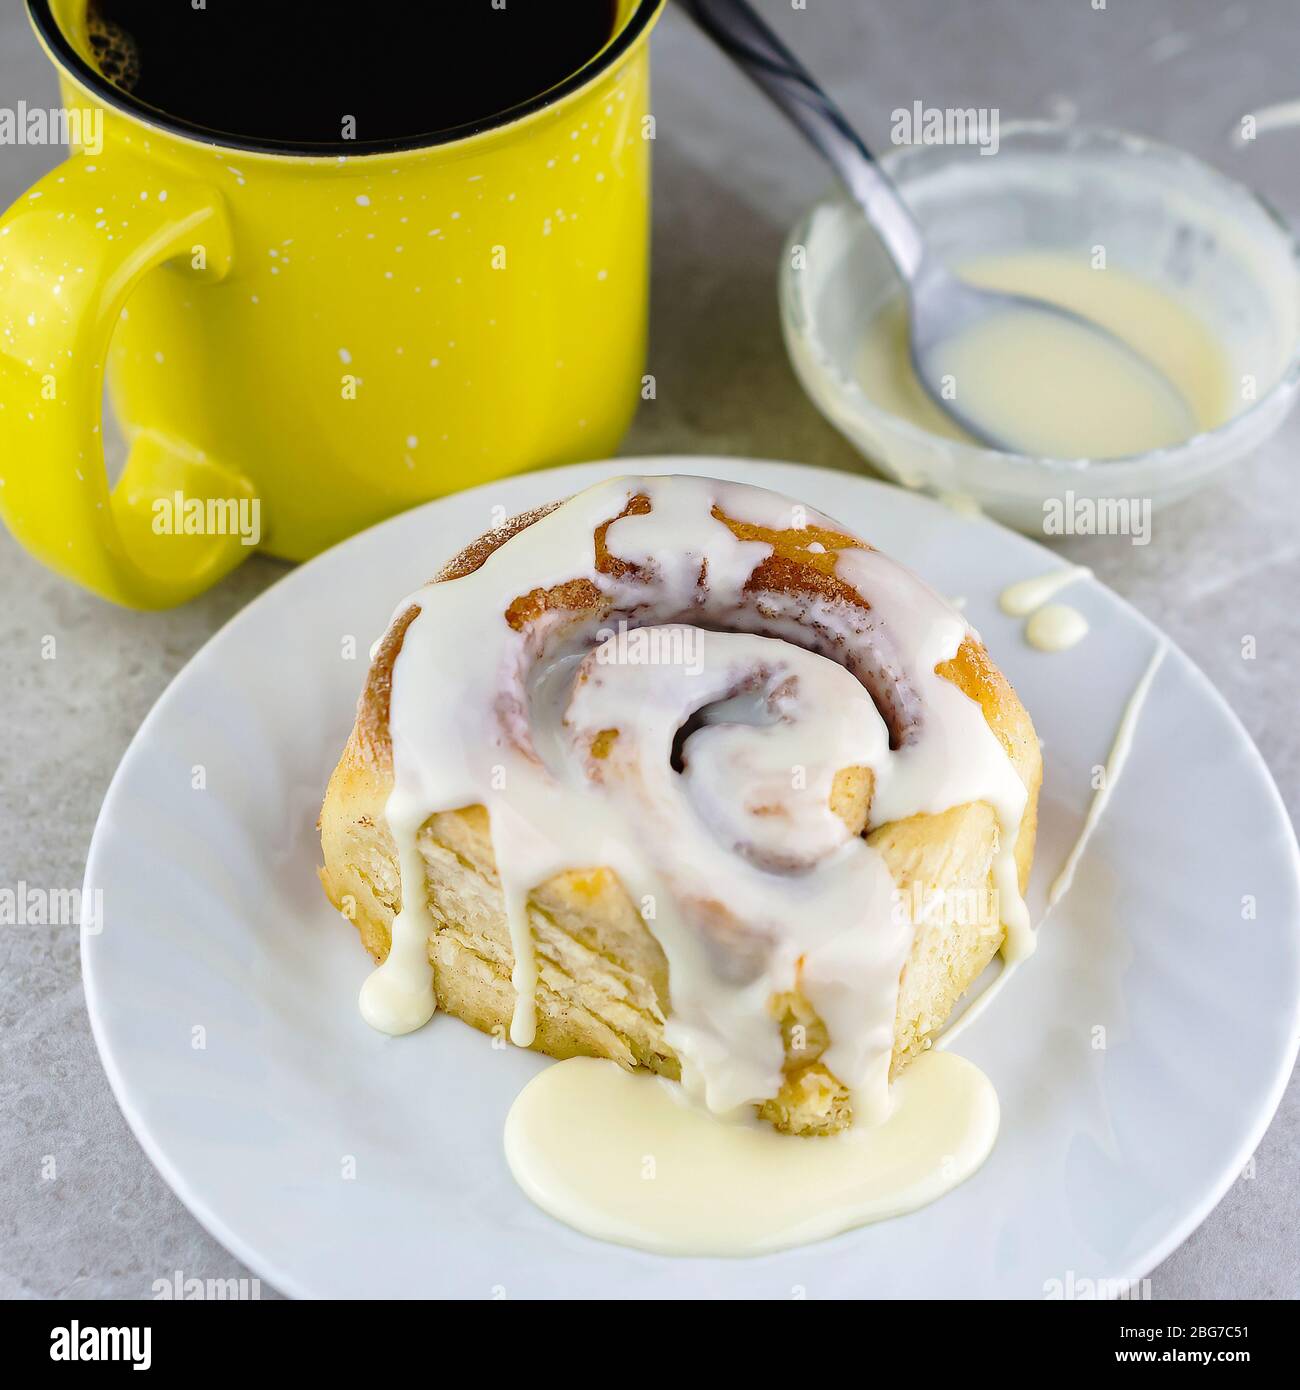 Cinnamon roll on a white plate with cup of coffee and bowl of glaze in the background. Stock Photo